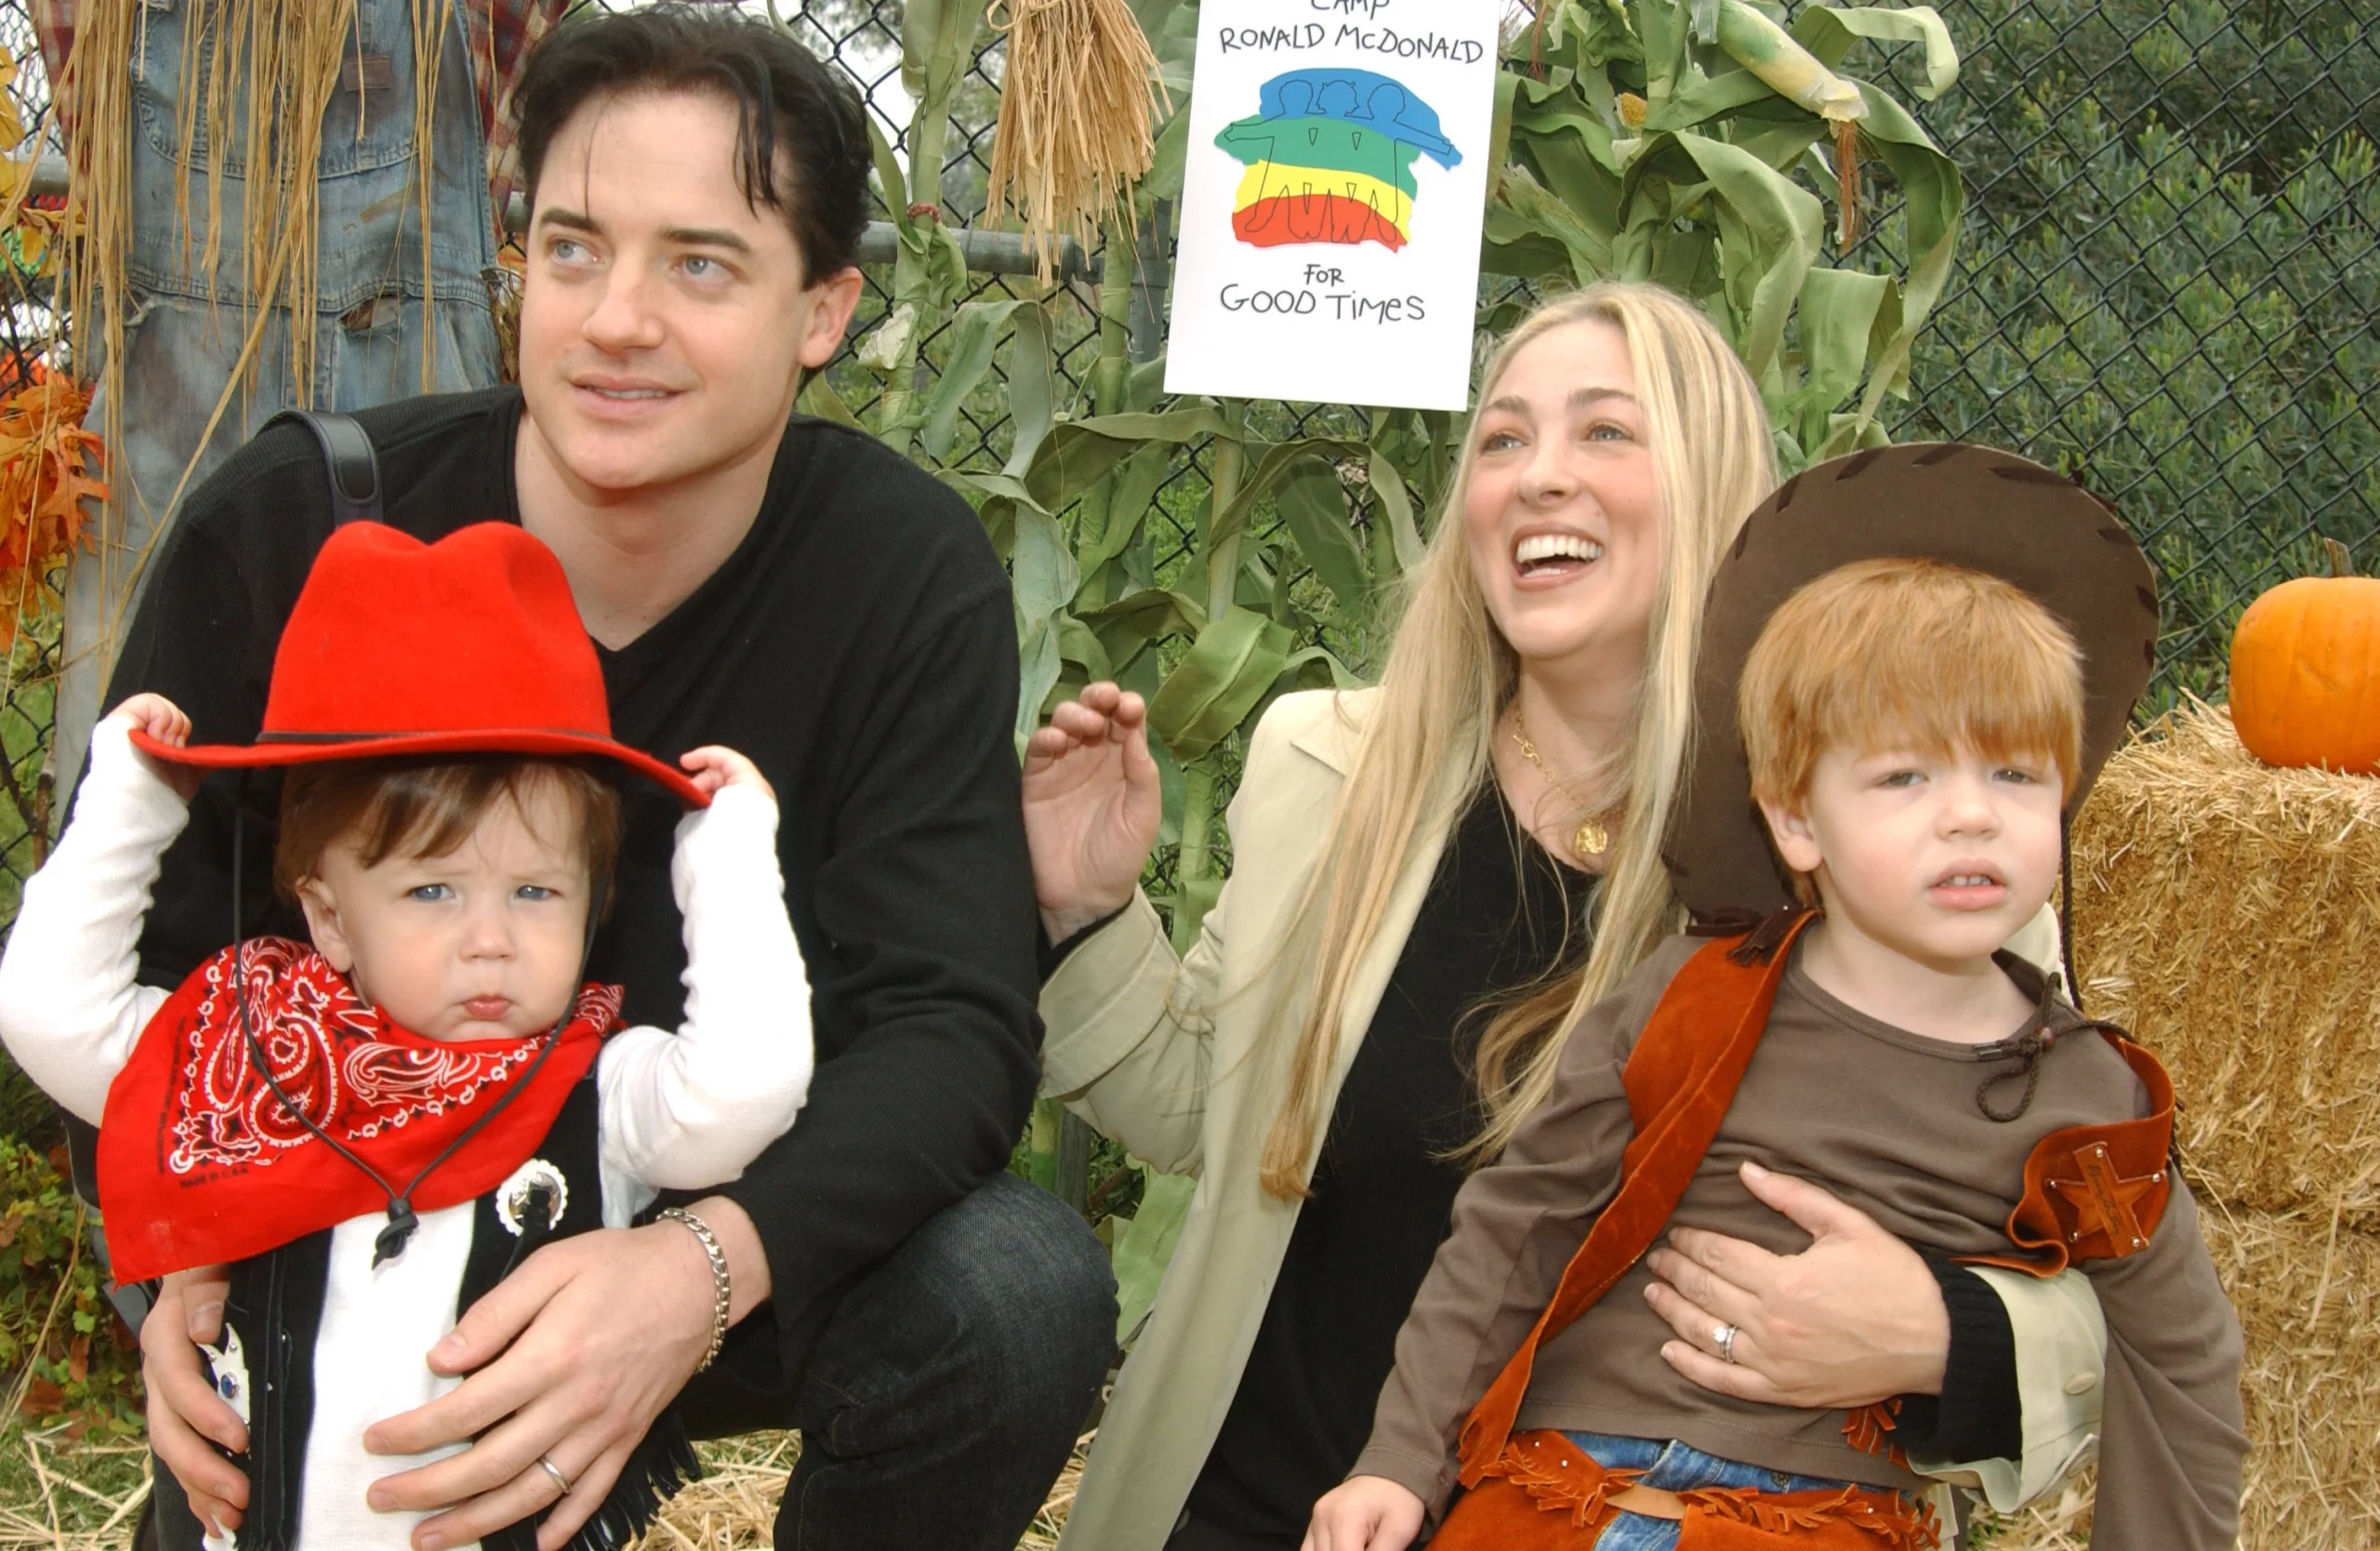 Brendan Fraser had to pay his wife a hefty alimony and child support